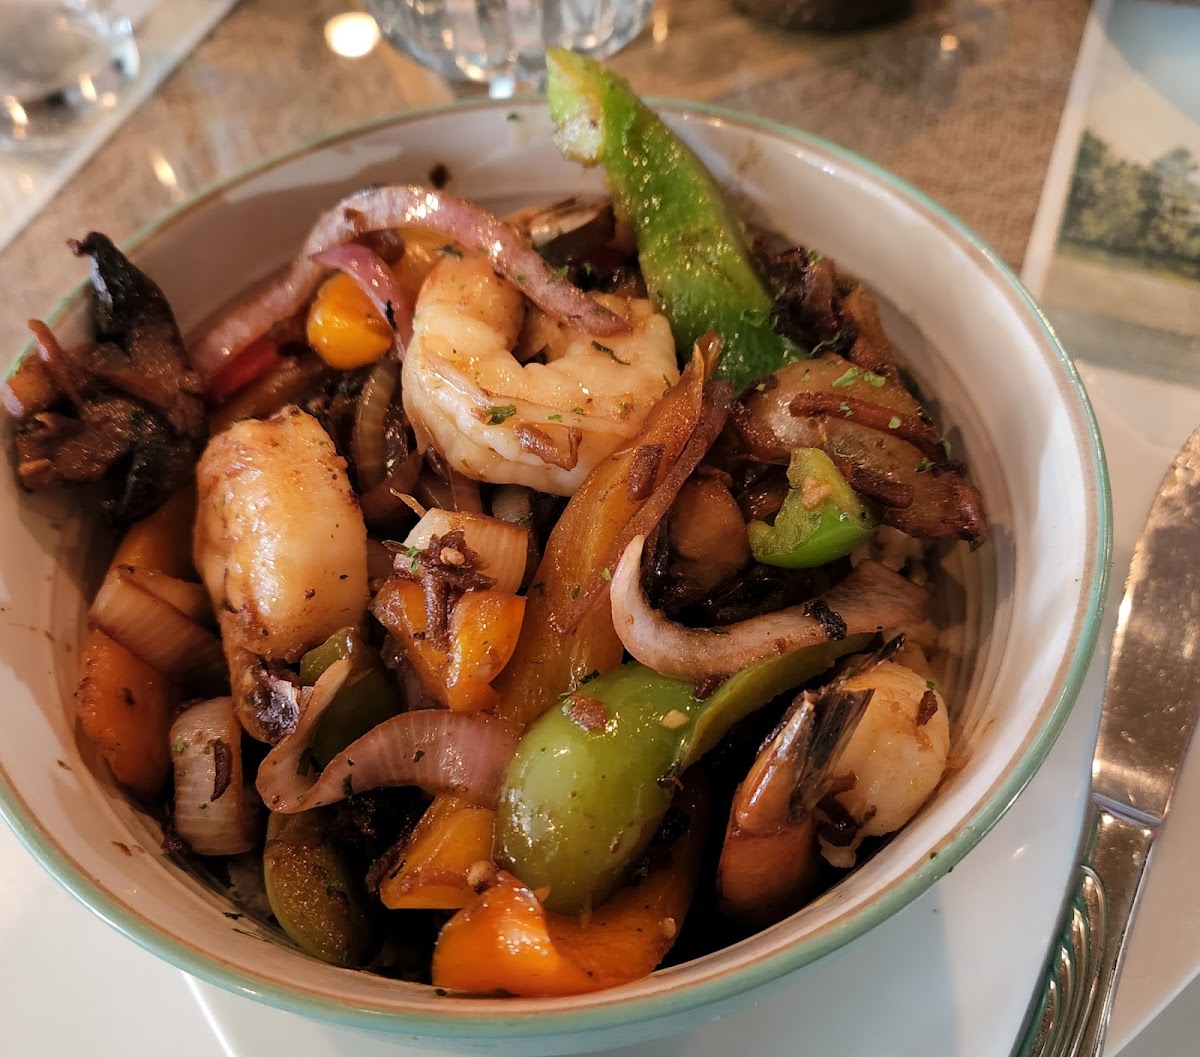 Shrimp rice bowl with grilled veggies